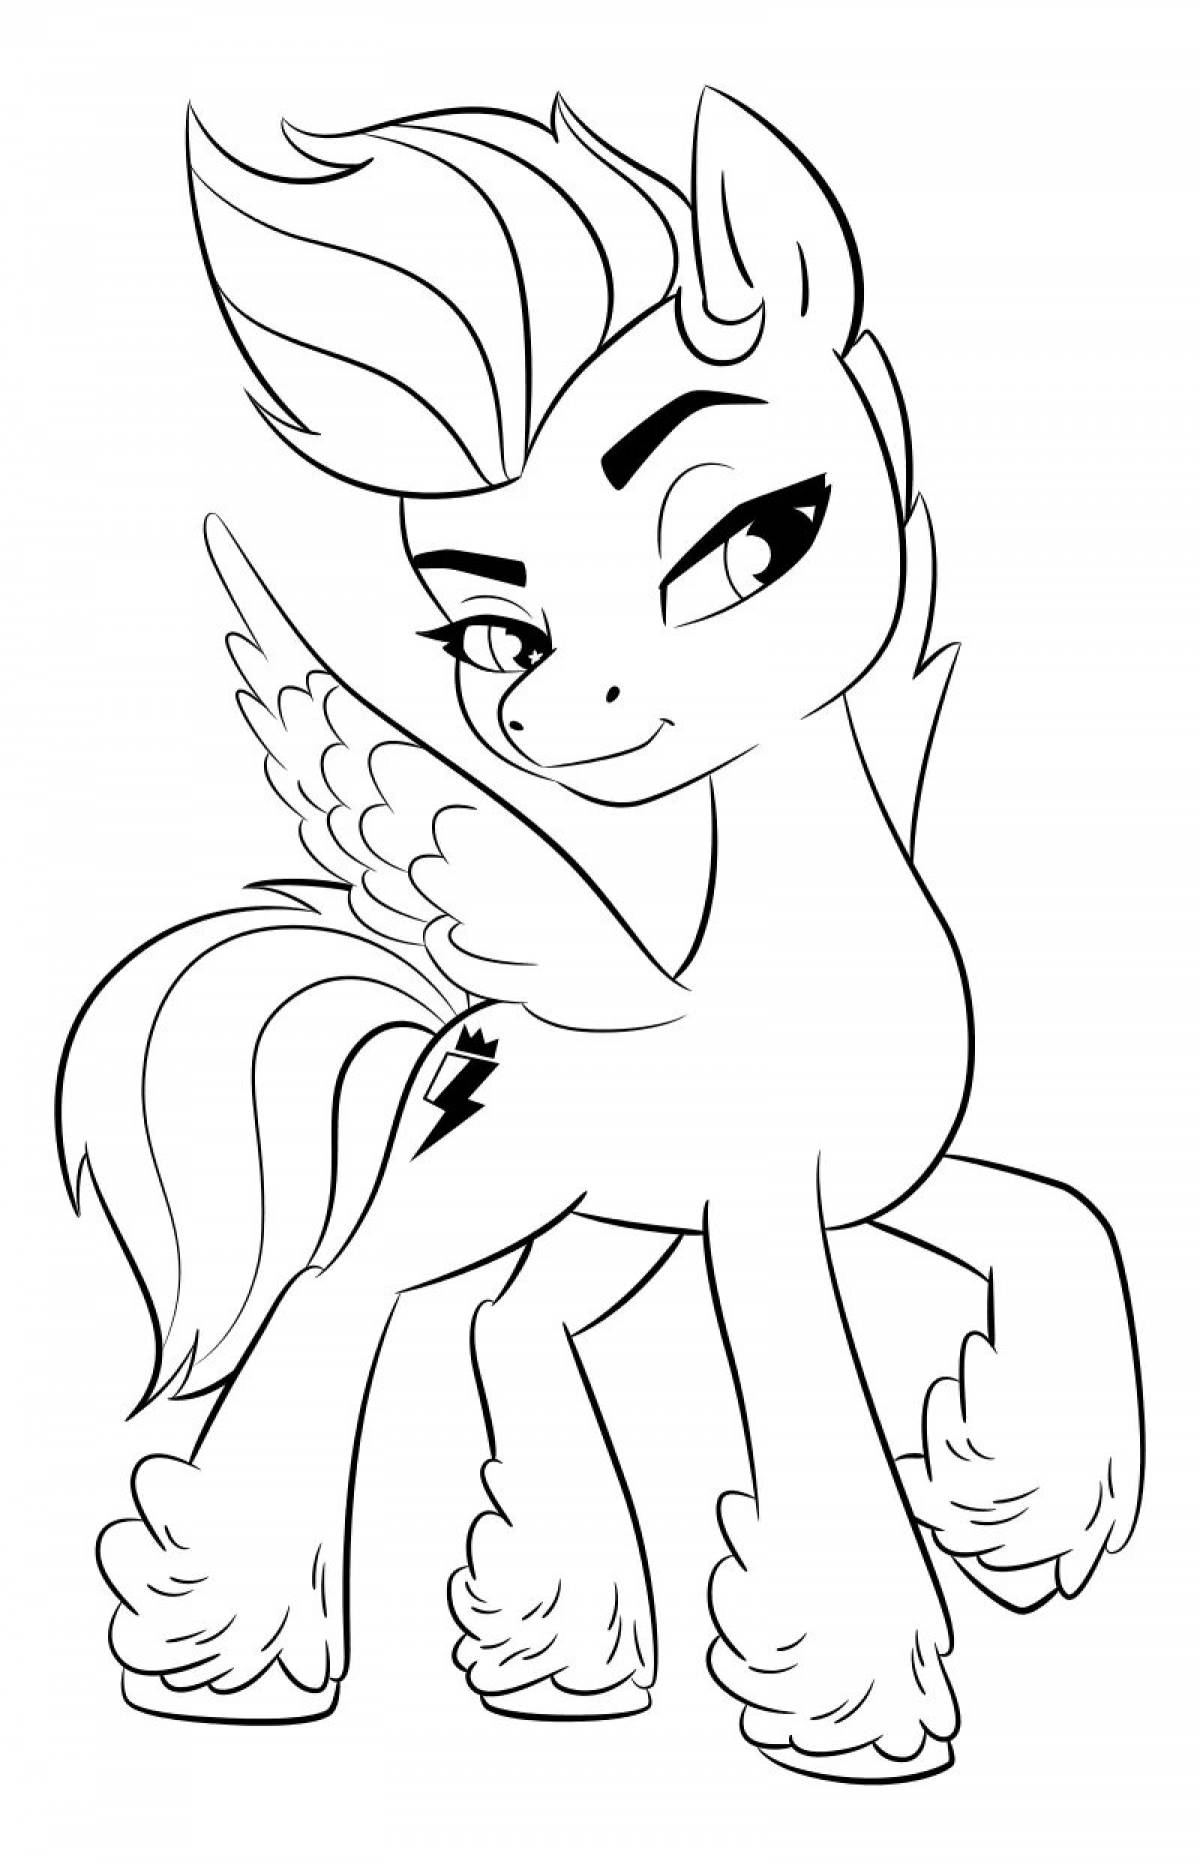 Glamorous pony coloring page